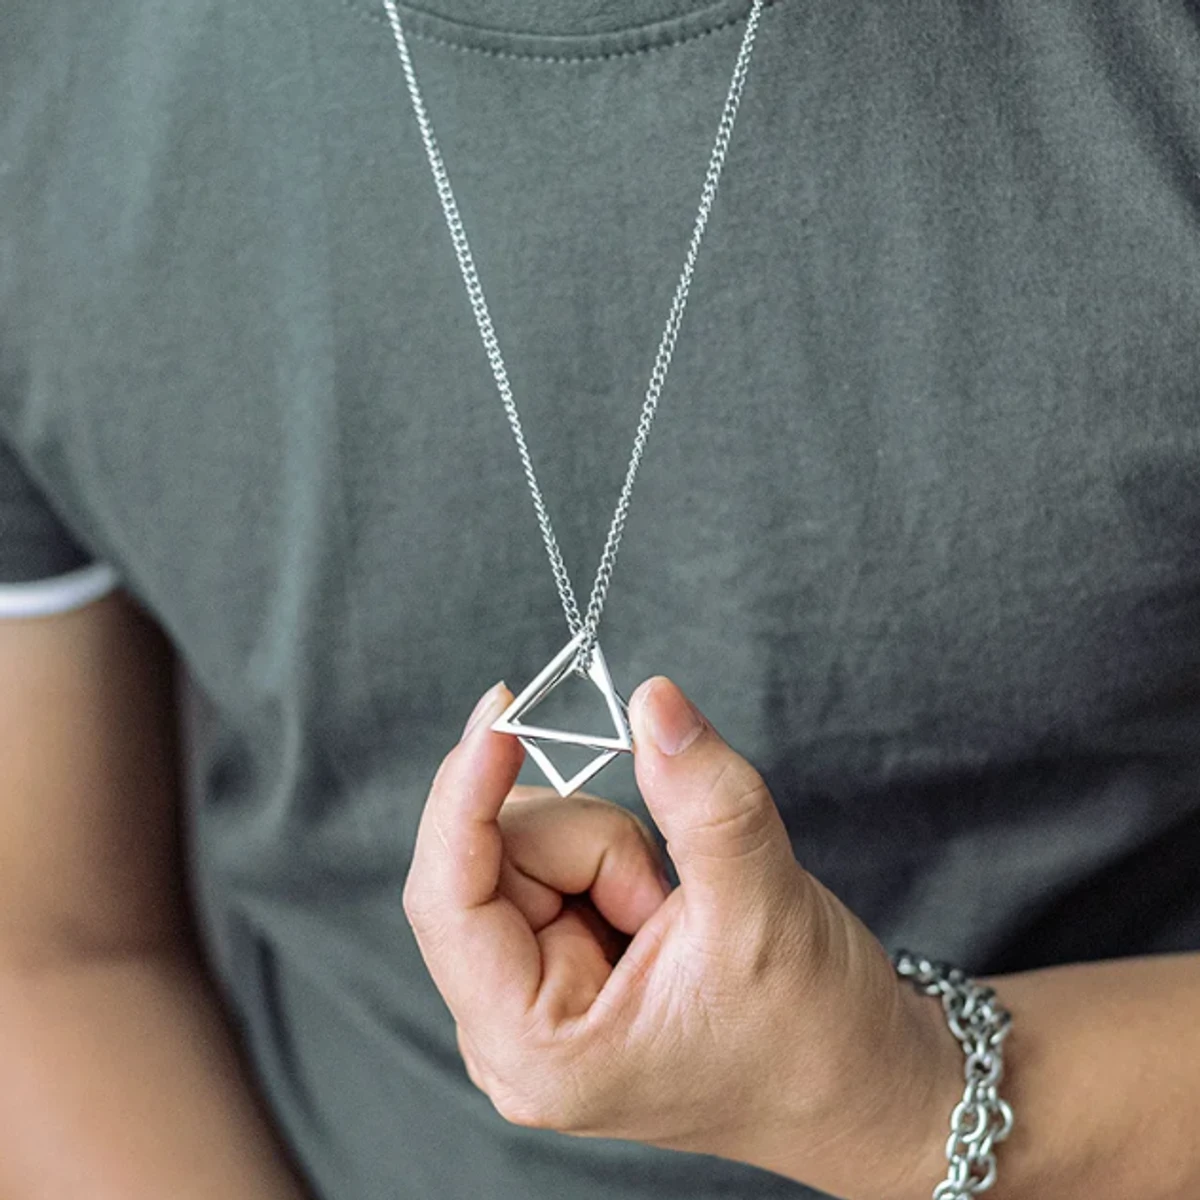 Square Triangle Pendant Necklace Men's Charm Rock Party Jewelry